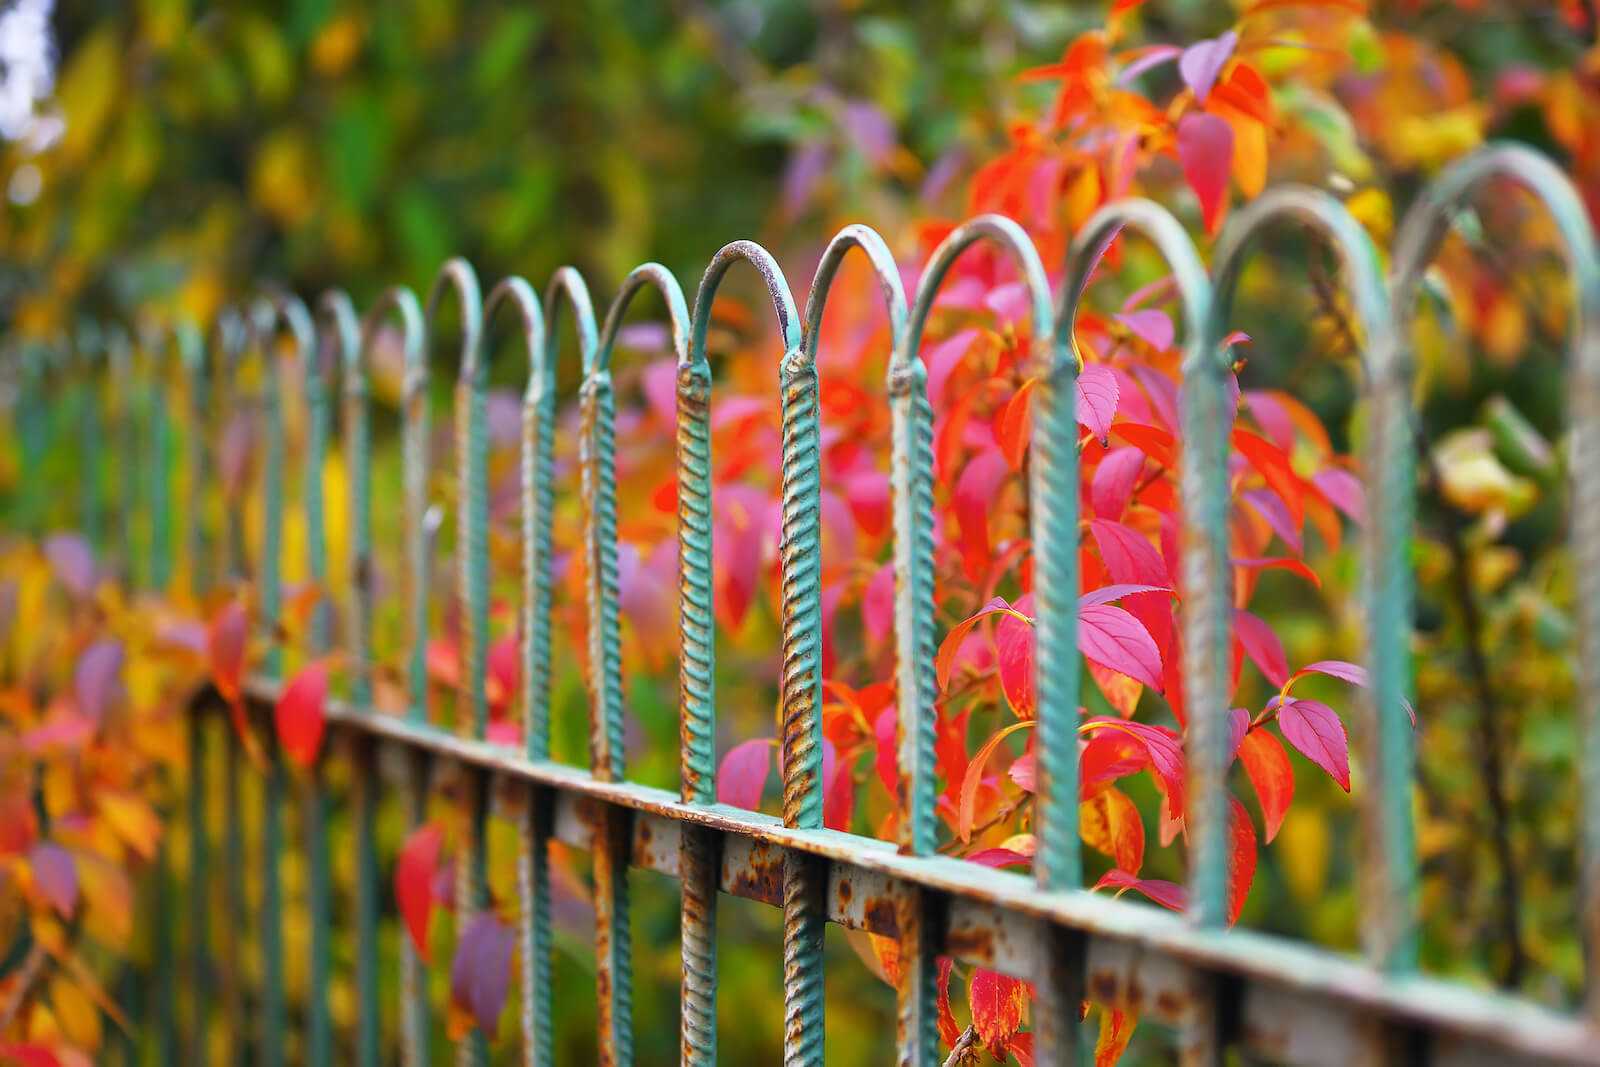 A metal fence in a garden with red leaves in the background.